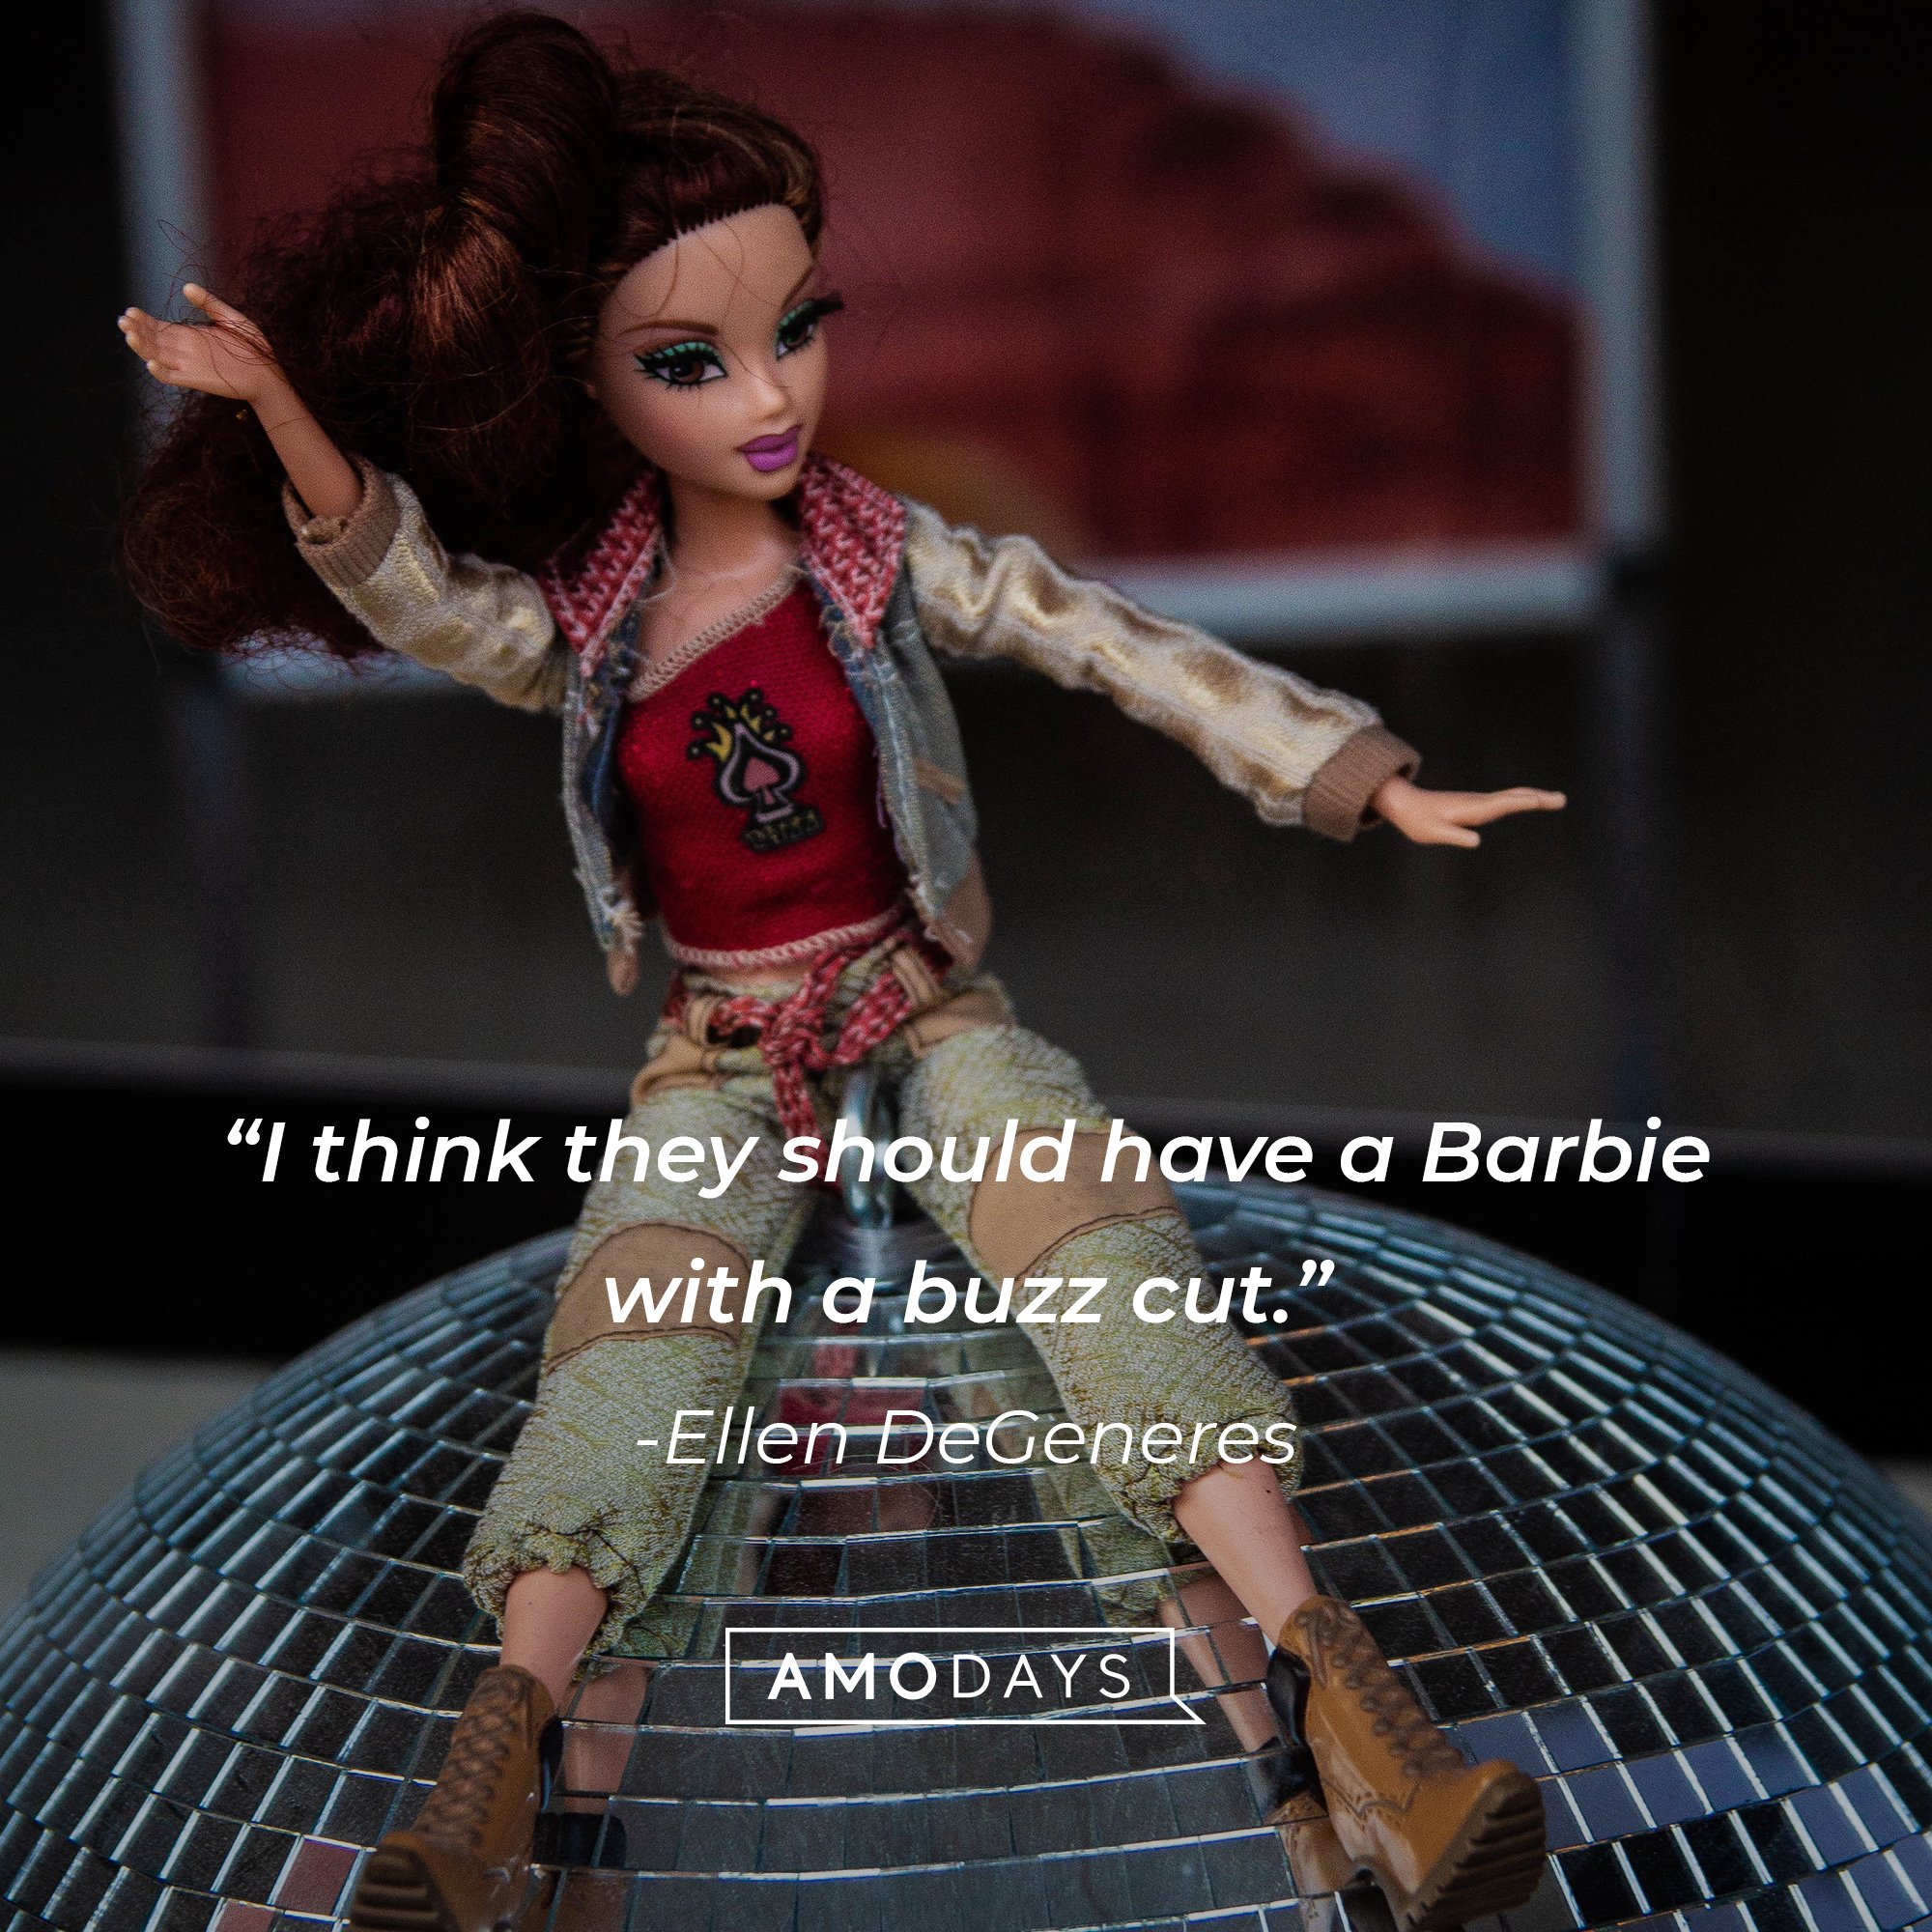 Ellen DeGeneres' quote: "I think they should have a Barbie with a buzz cut." | Image: AmoDays